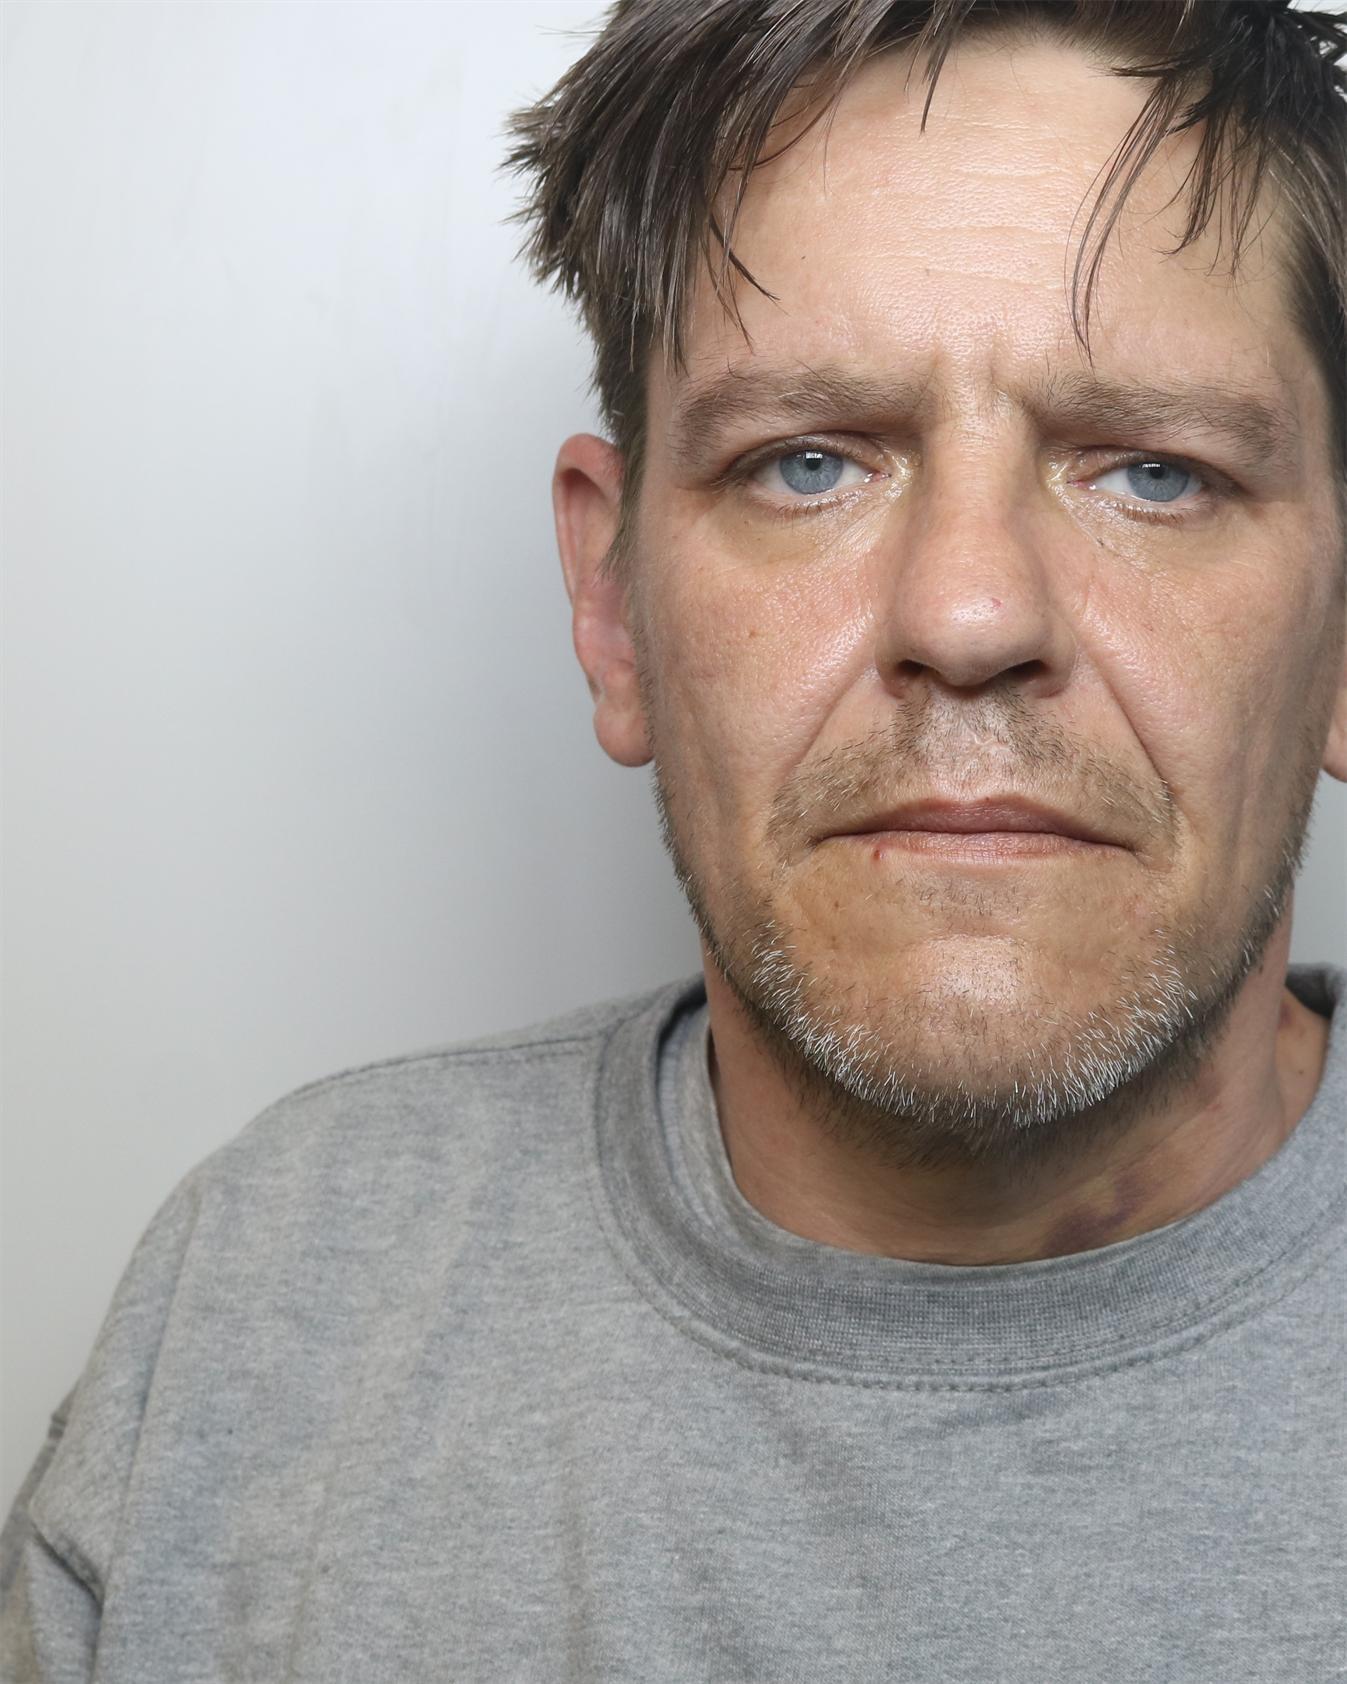 Peter Thomas was jailed at Liverpool Crown Court